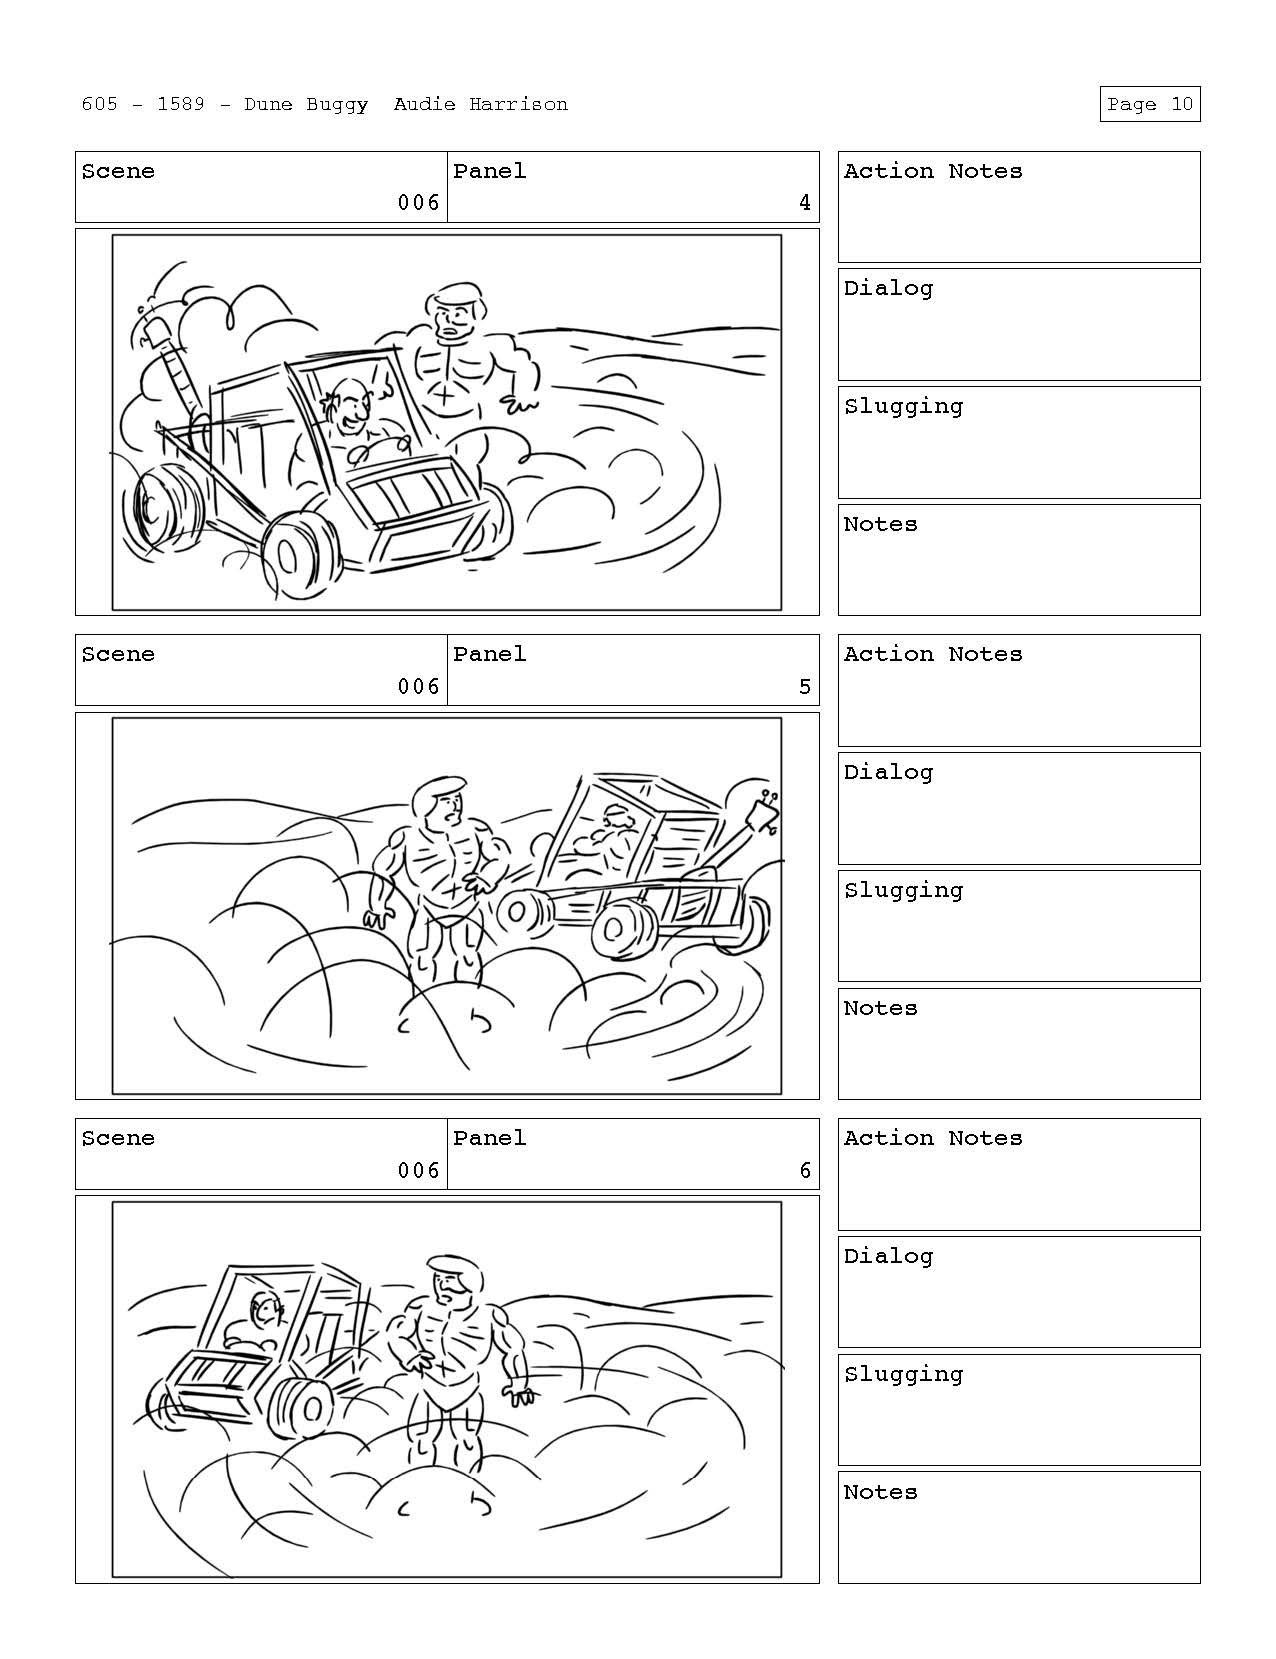 Dune_Buggy_Page_11.jpg